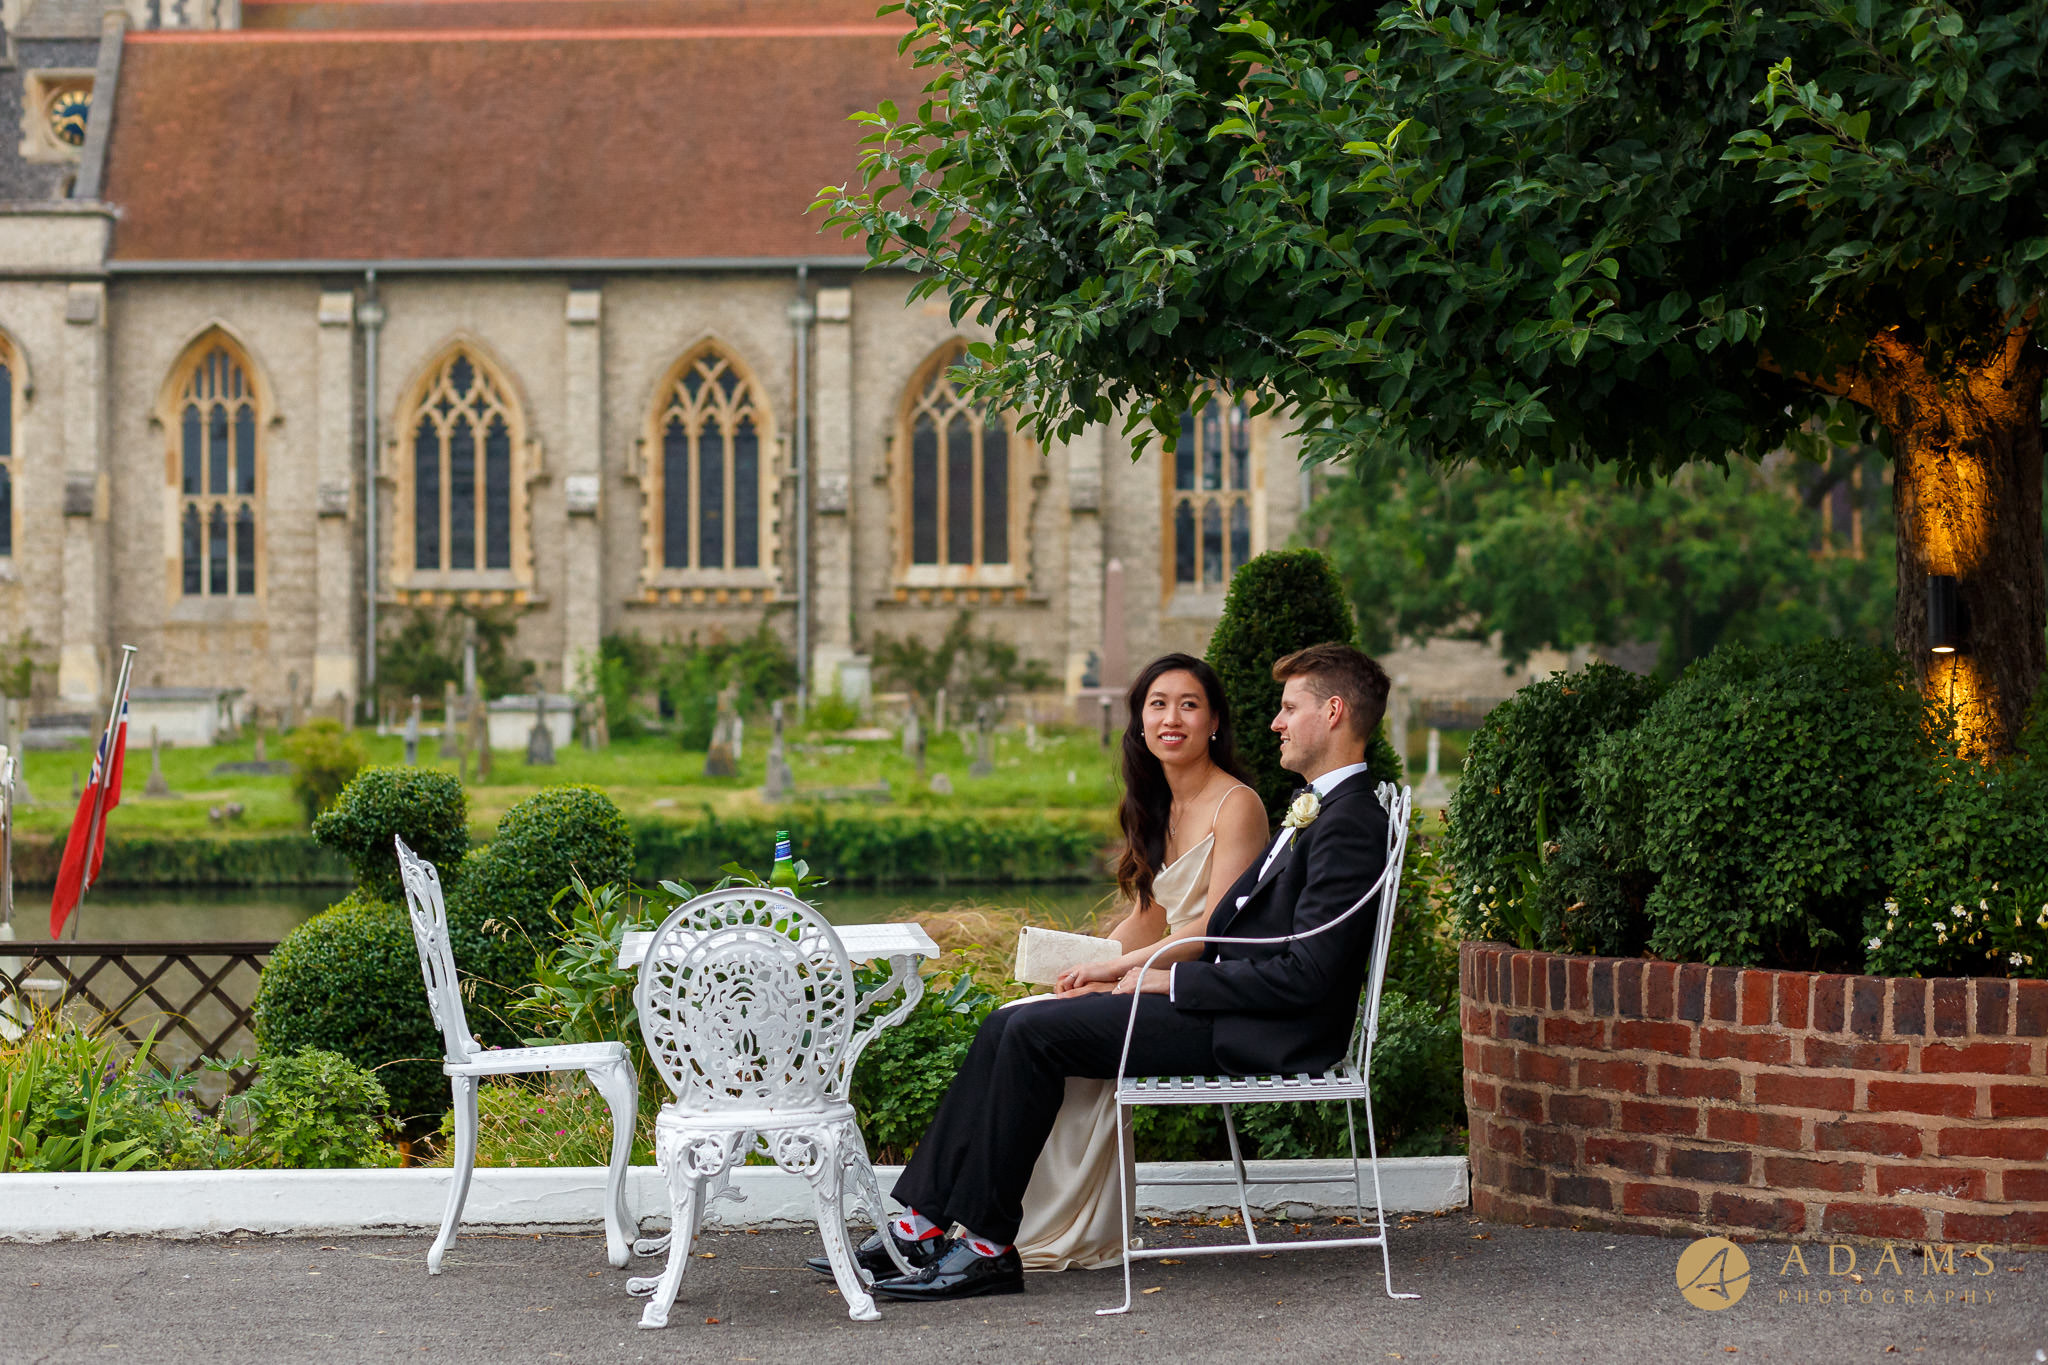 Portrait of the newlyweds at Compleat Angler Hotel